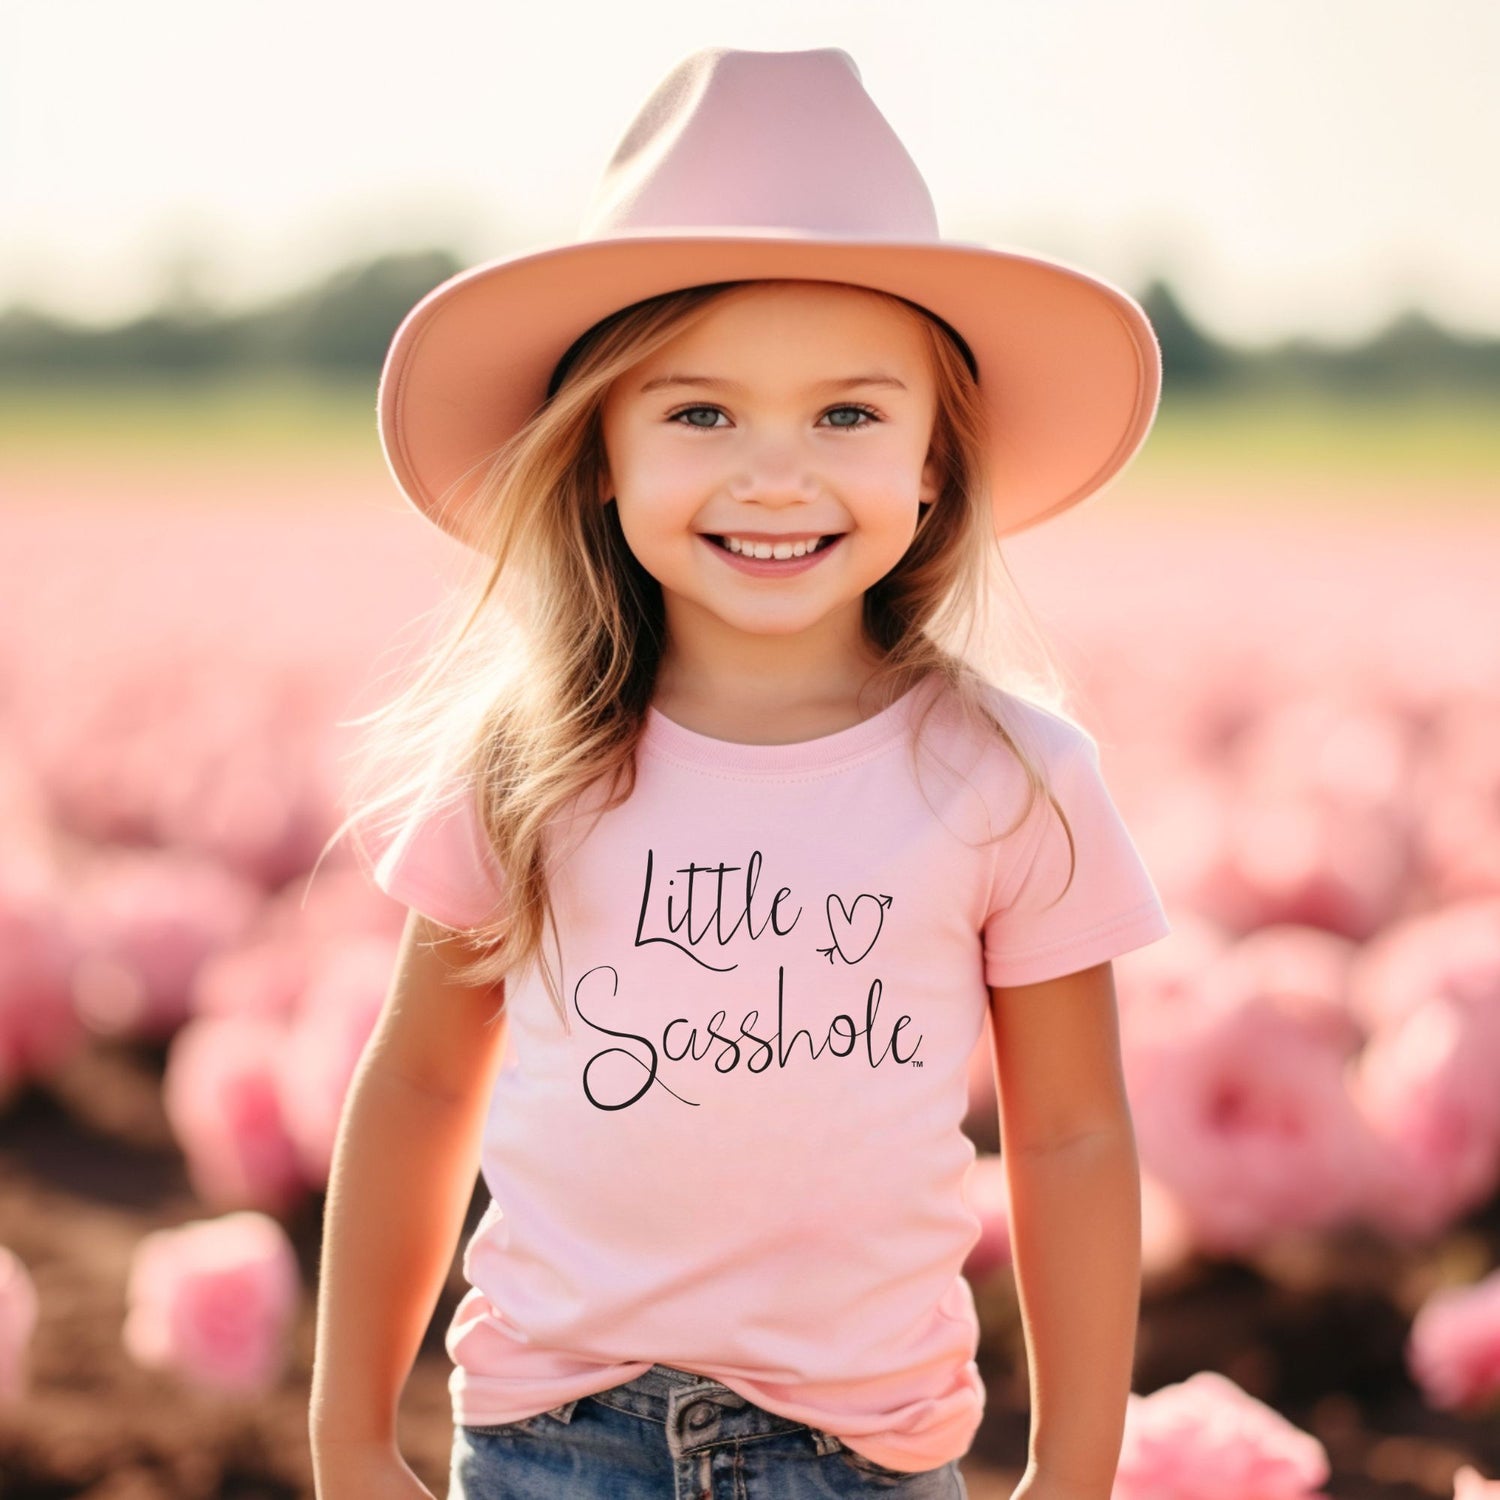 Little Sasshole™: Trendy Toddler Fashion with a Sassy Twist